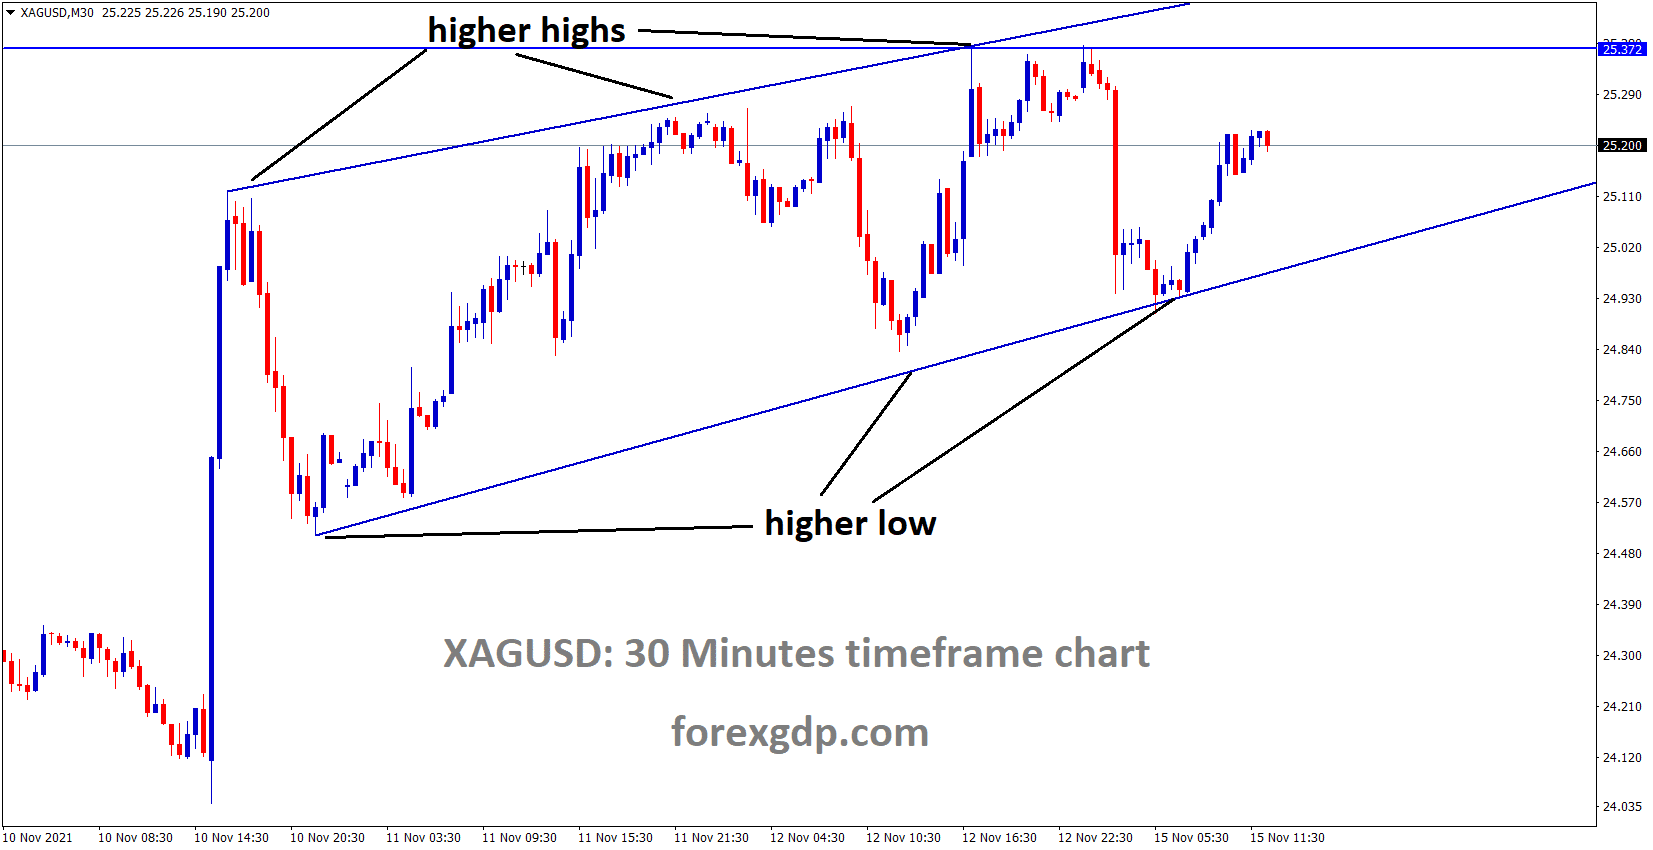 XAGUSD Silver price is moving in an Ascending channel and rebounded from the higher low area of the channel 1